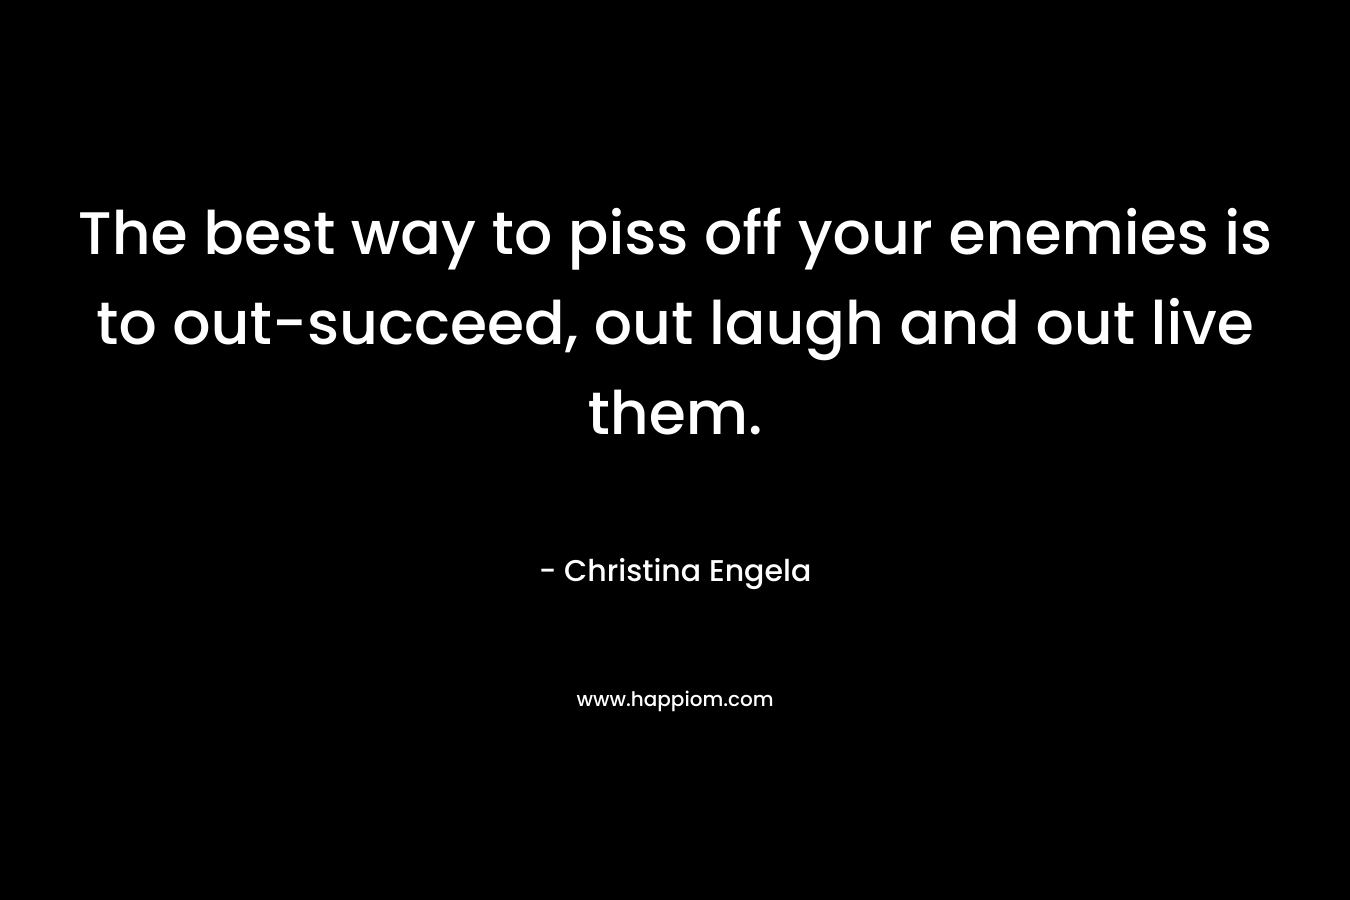 The best way to piss off your enemies is to out-succeed, out laugh and out live them. – Christina Engela